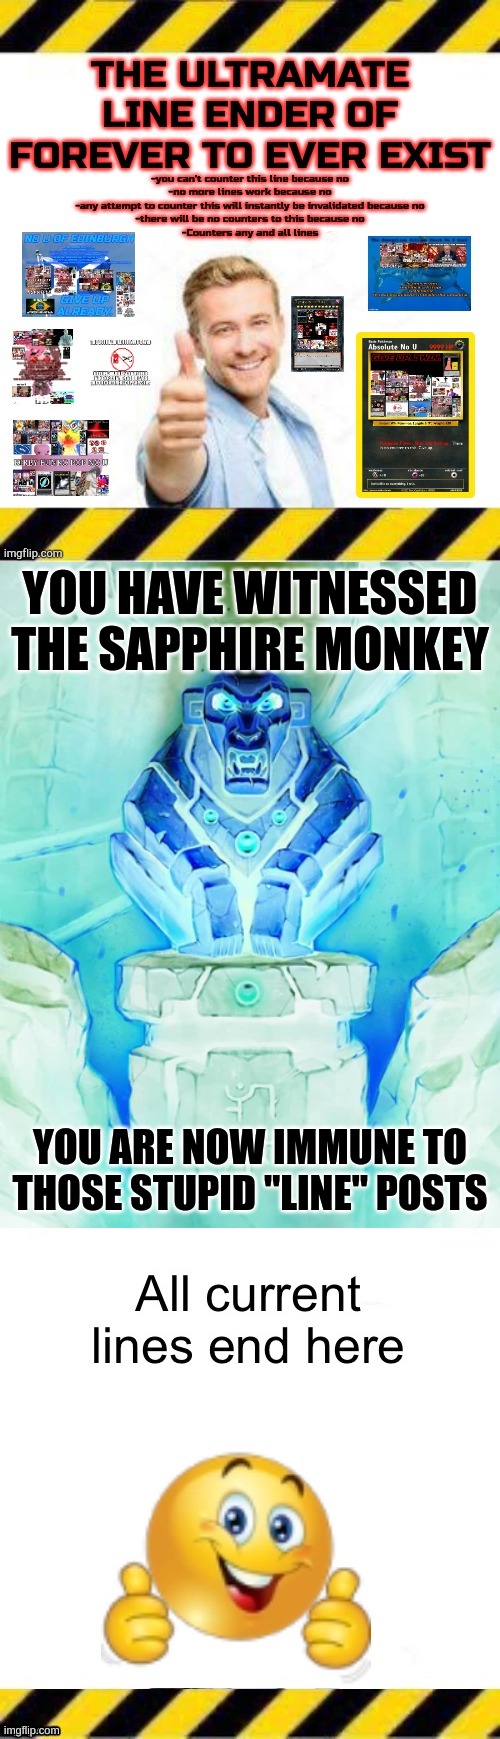 image tagged in ultramate line ender,witness the power of the sapphire monkey,all current lines end here | made w/ Imgflip meme maker